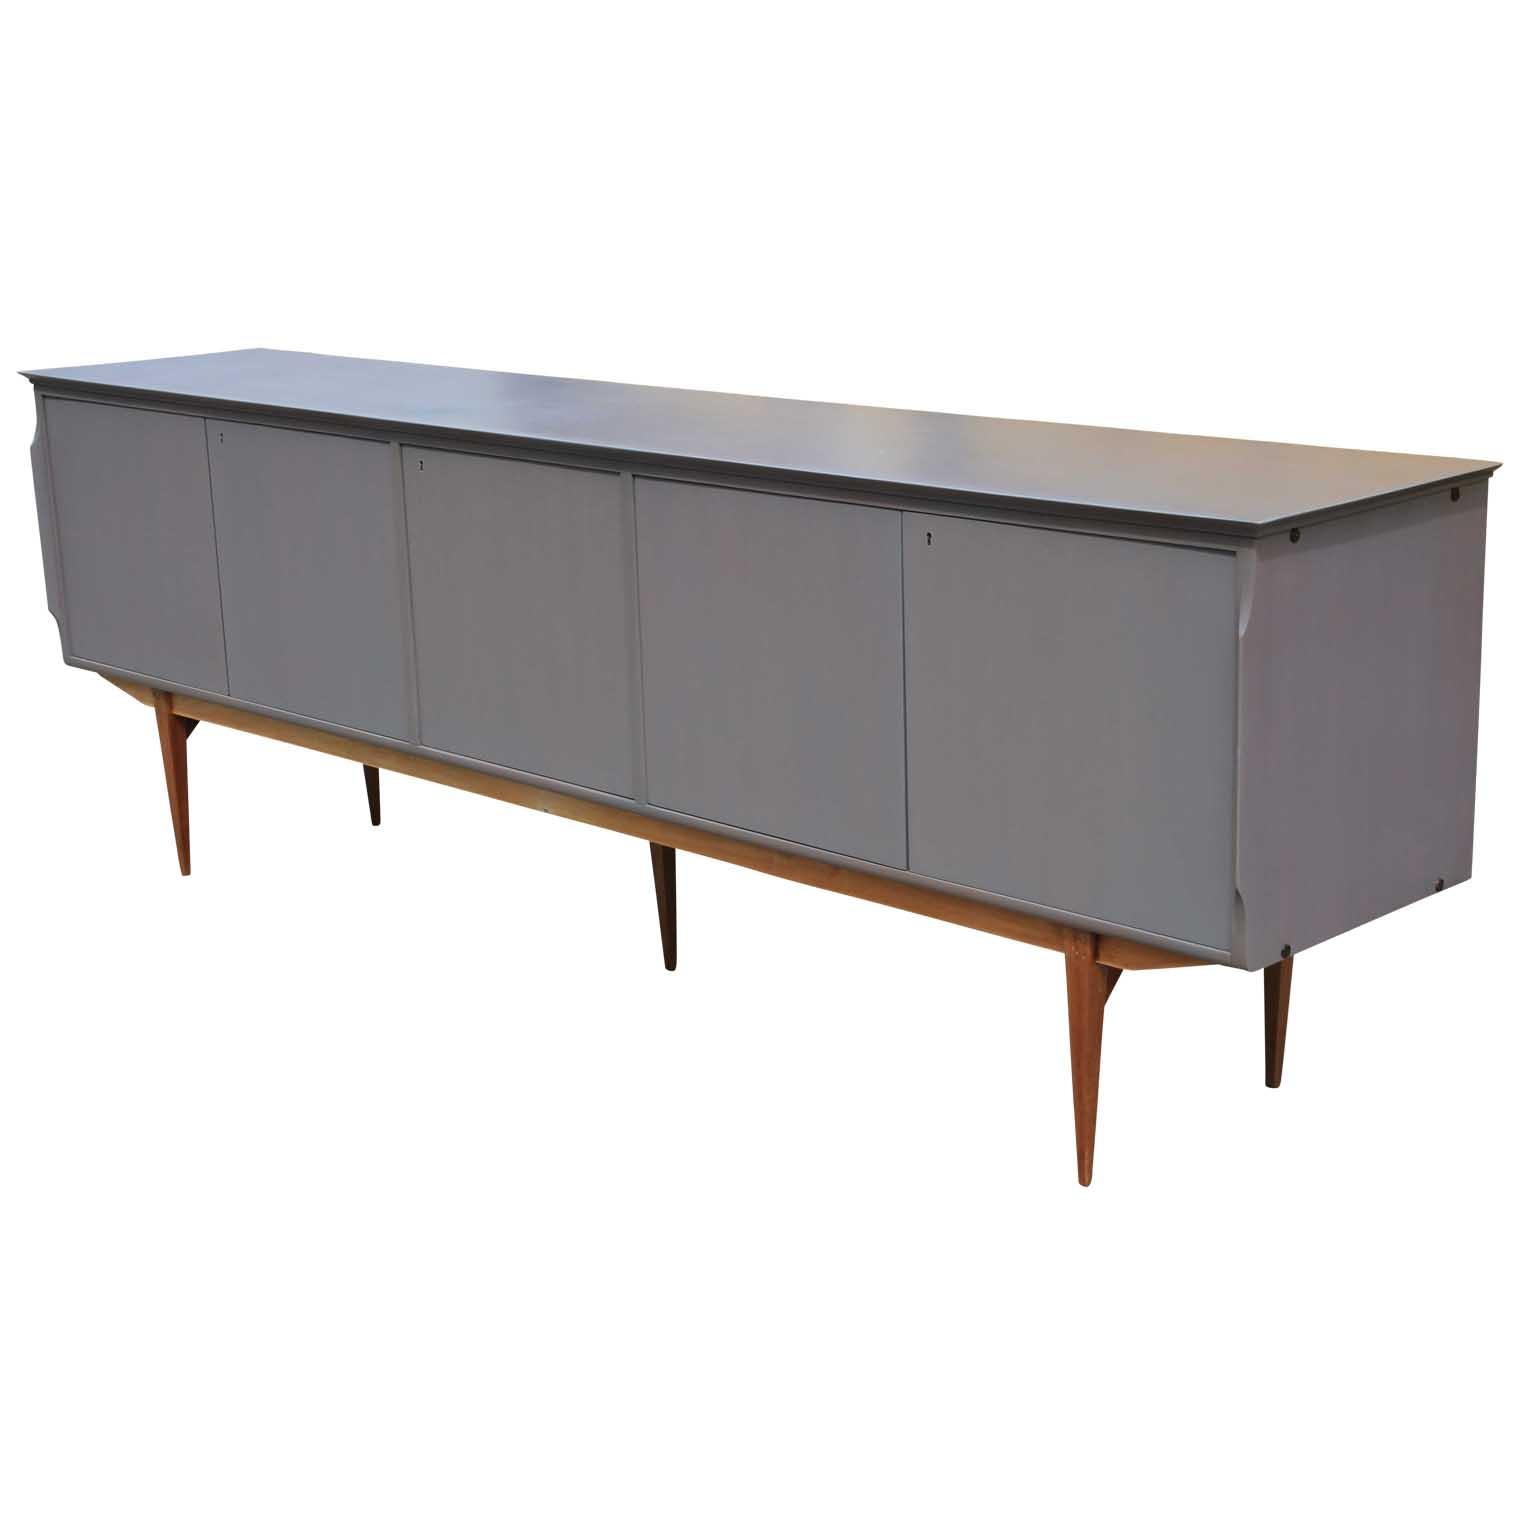 Wonderful restored Italian modern sideboard, circa 1950. The extra long sideboard had been refinished in a light grey stain while leaving the legs natural. The interior has been left original as the wood tones were quite beautiful. A show stopper in